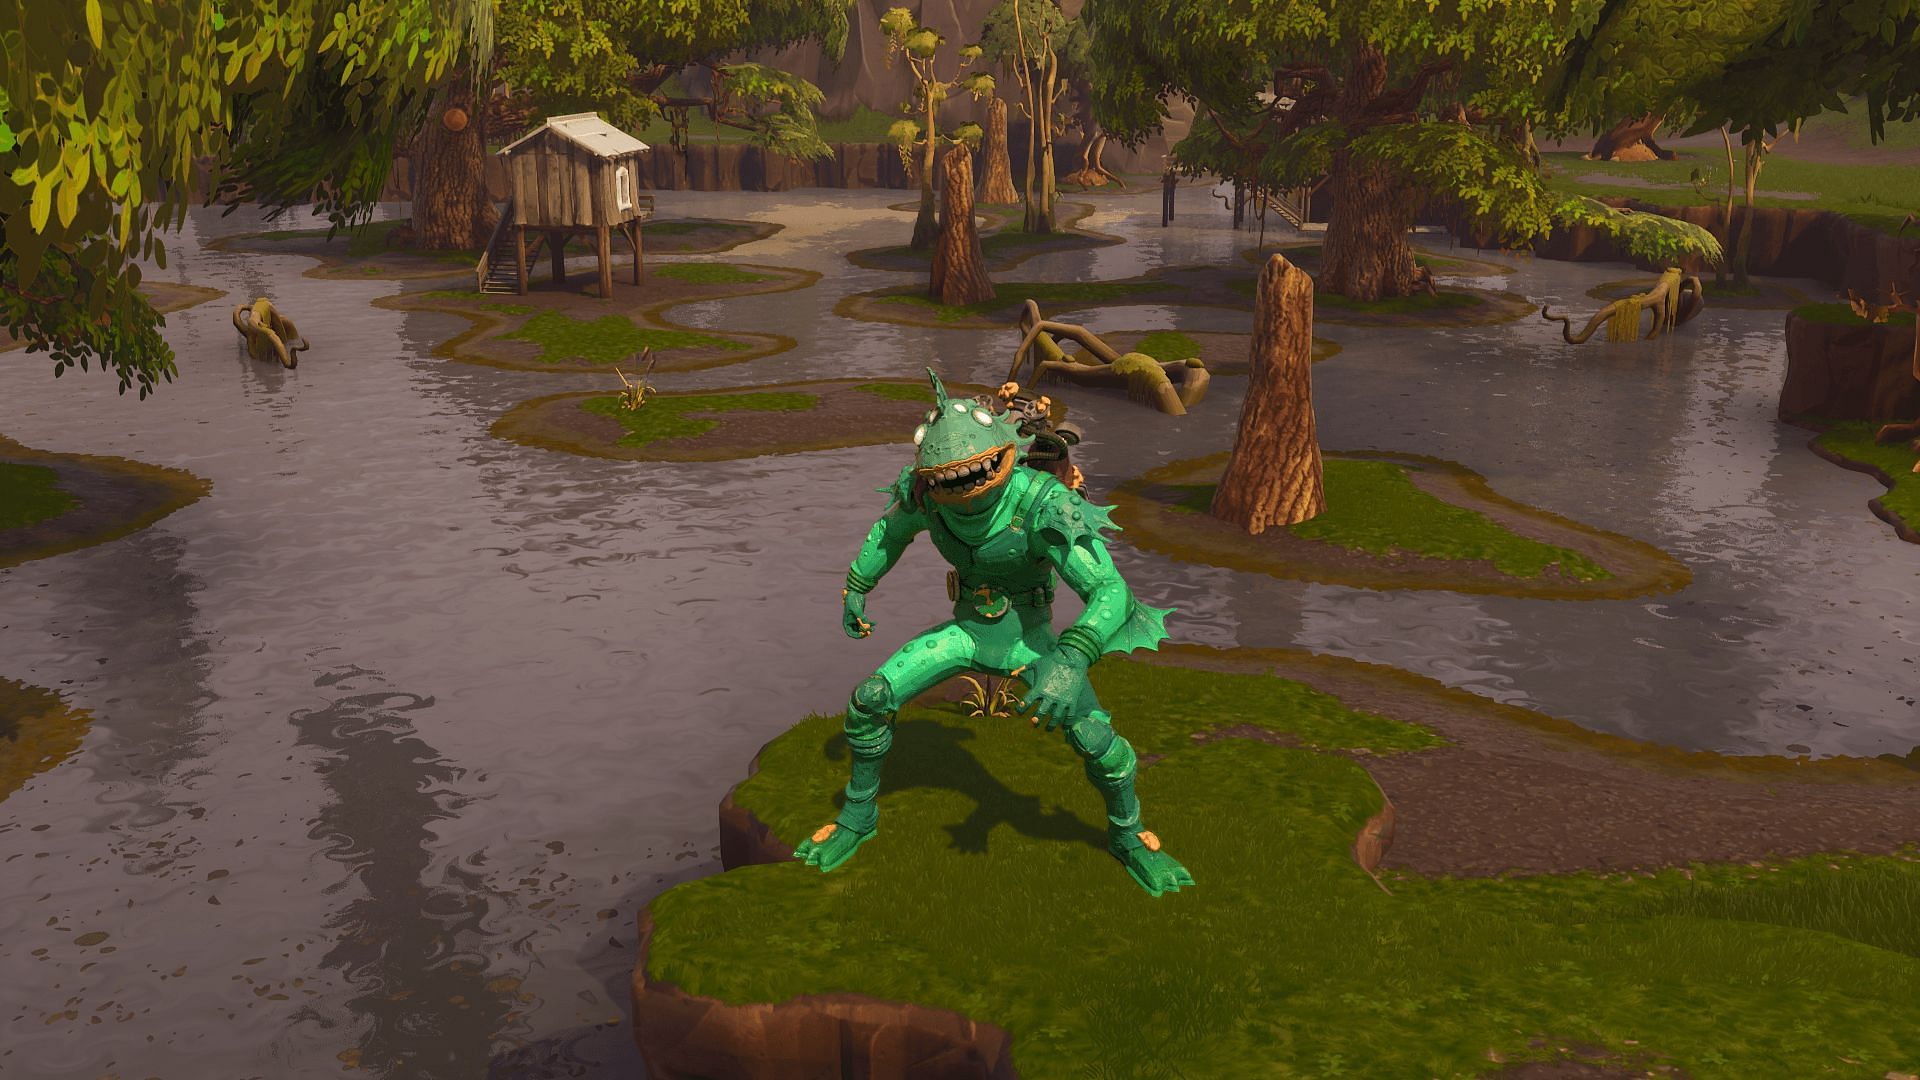 Moisty Mire was located in a special Fortnite biome (Image via Epic Games)